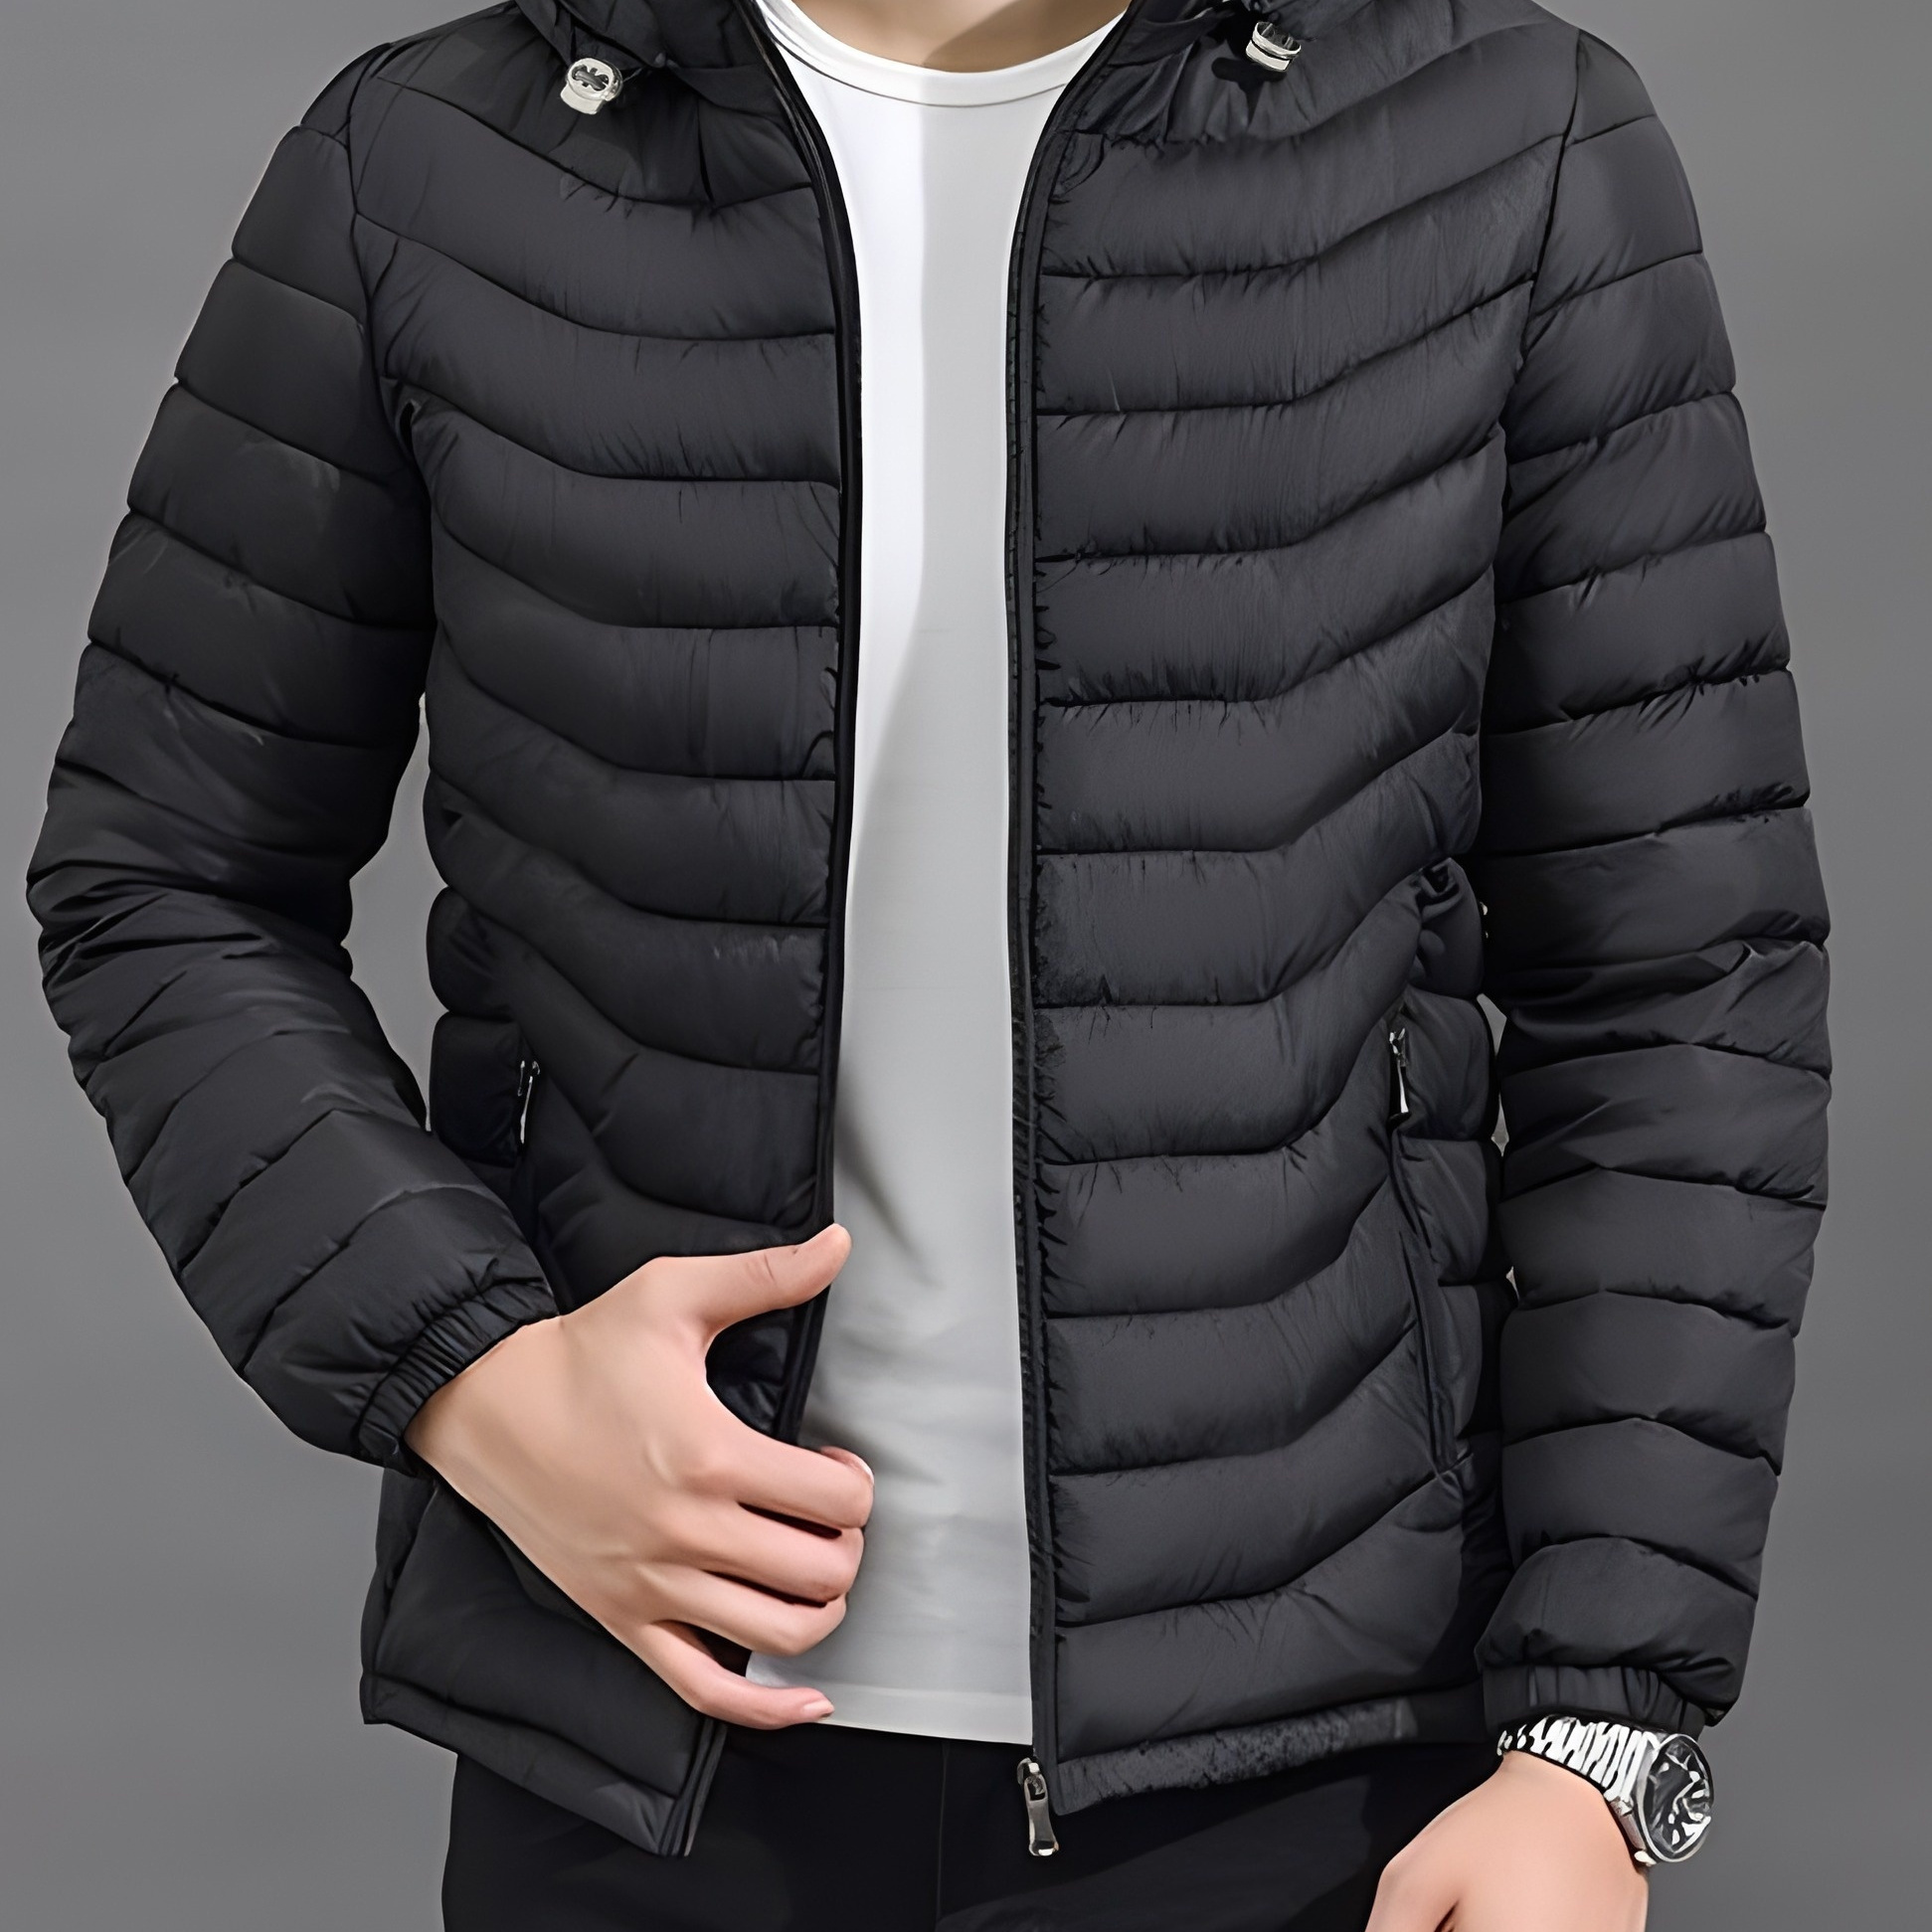 

Men's Stylish Solid Puffer Coat With Pockets, Casual Breathable Stand Collar Zip Up Long Sleeve Warm Hooded Quilted Jacket For City Walk Street Hanging Winter Outdoor Activities